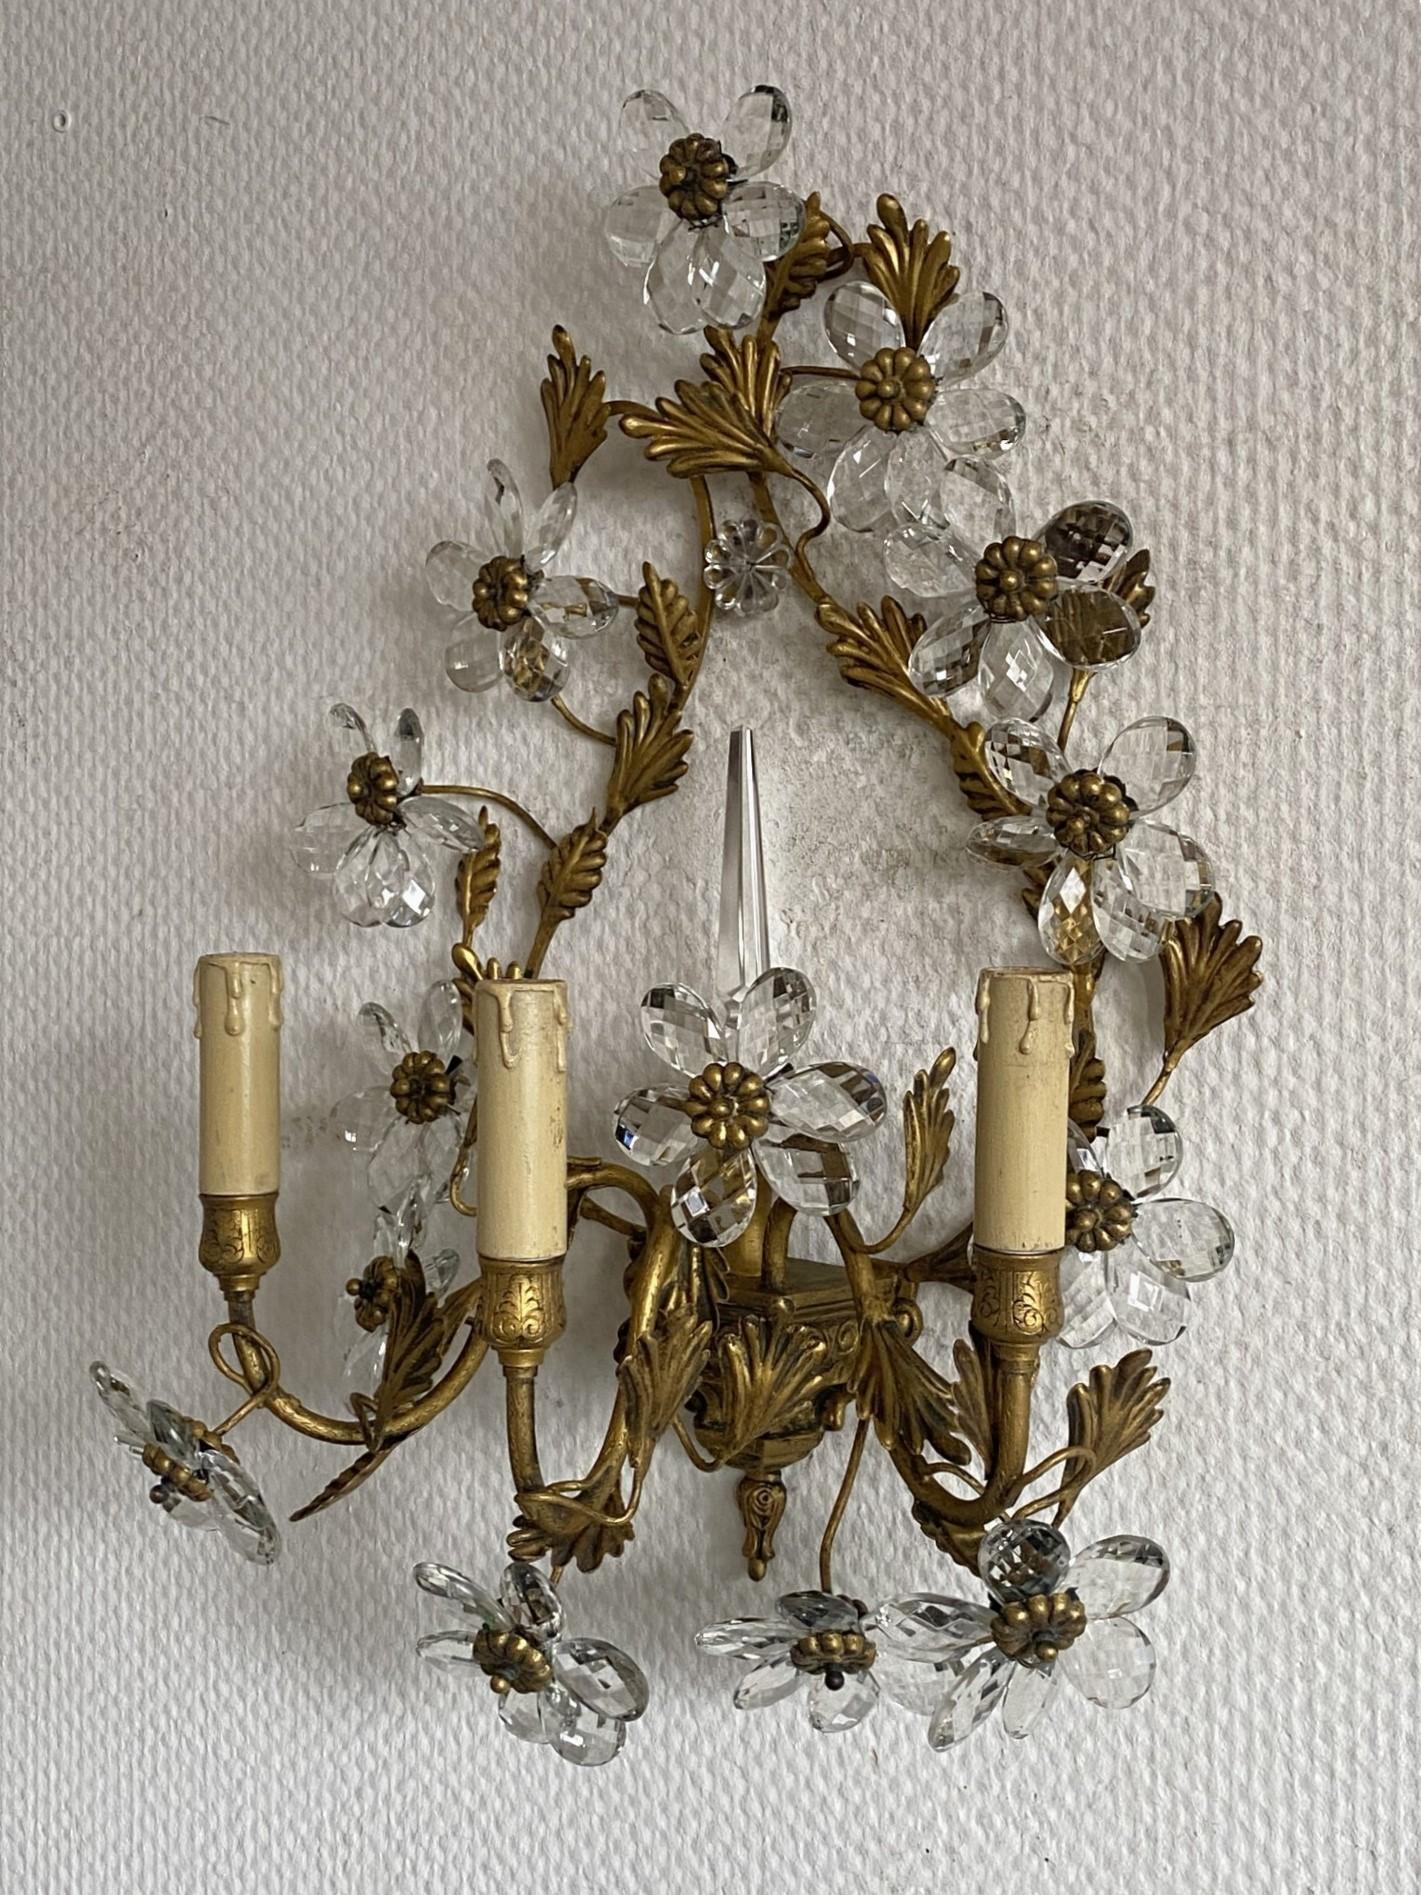 Pair of Large Maison Baguès Wrought Iron Crystal Flower Wall Sconces, 1930s In Good Condition For Sale In Frankfurt am Main, DE